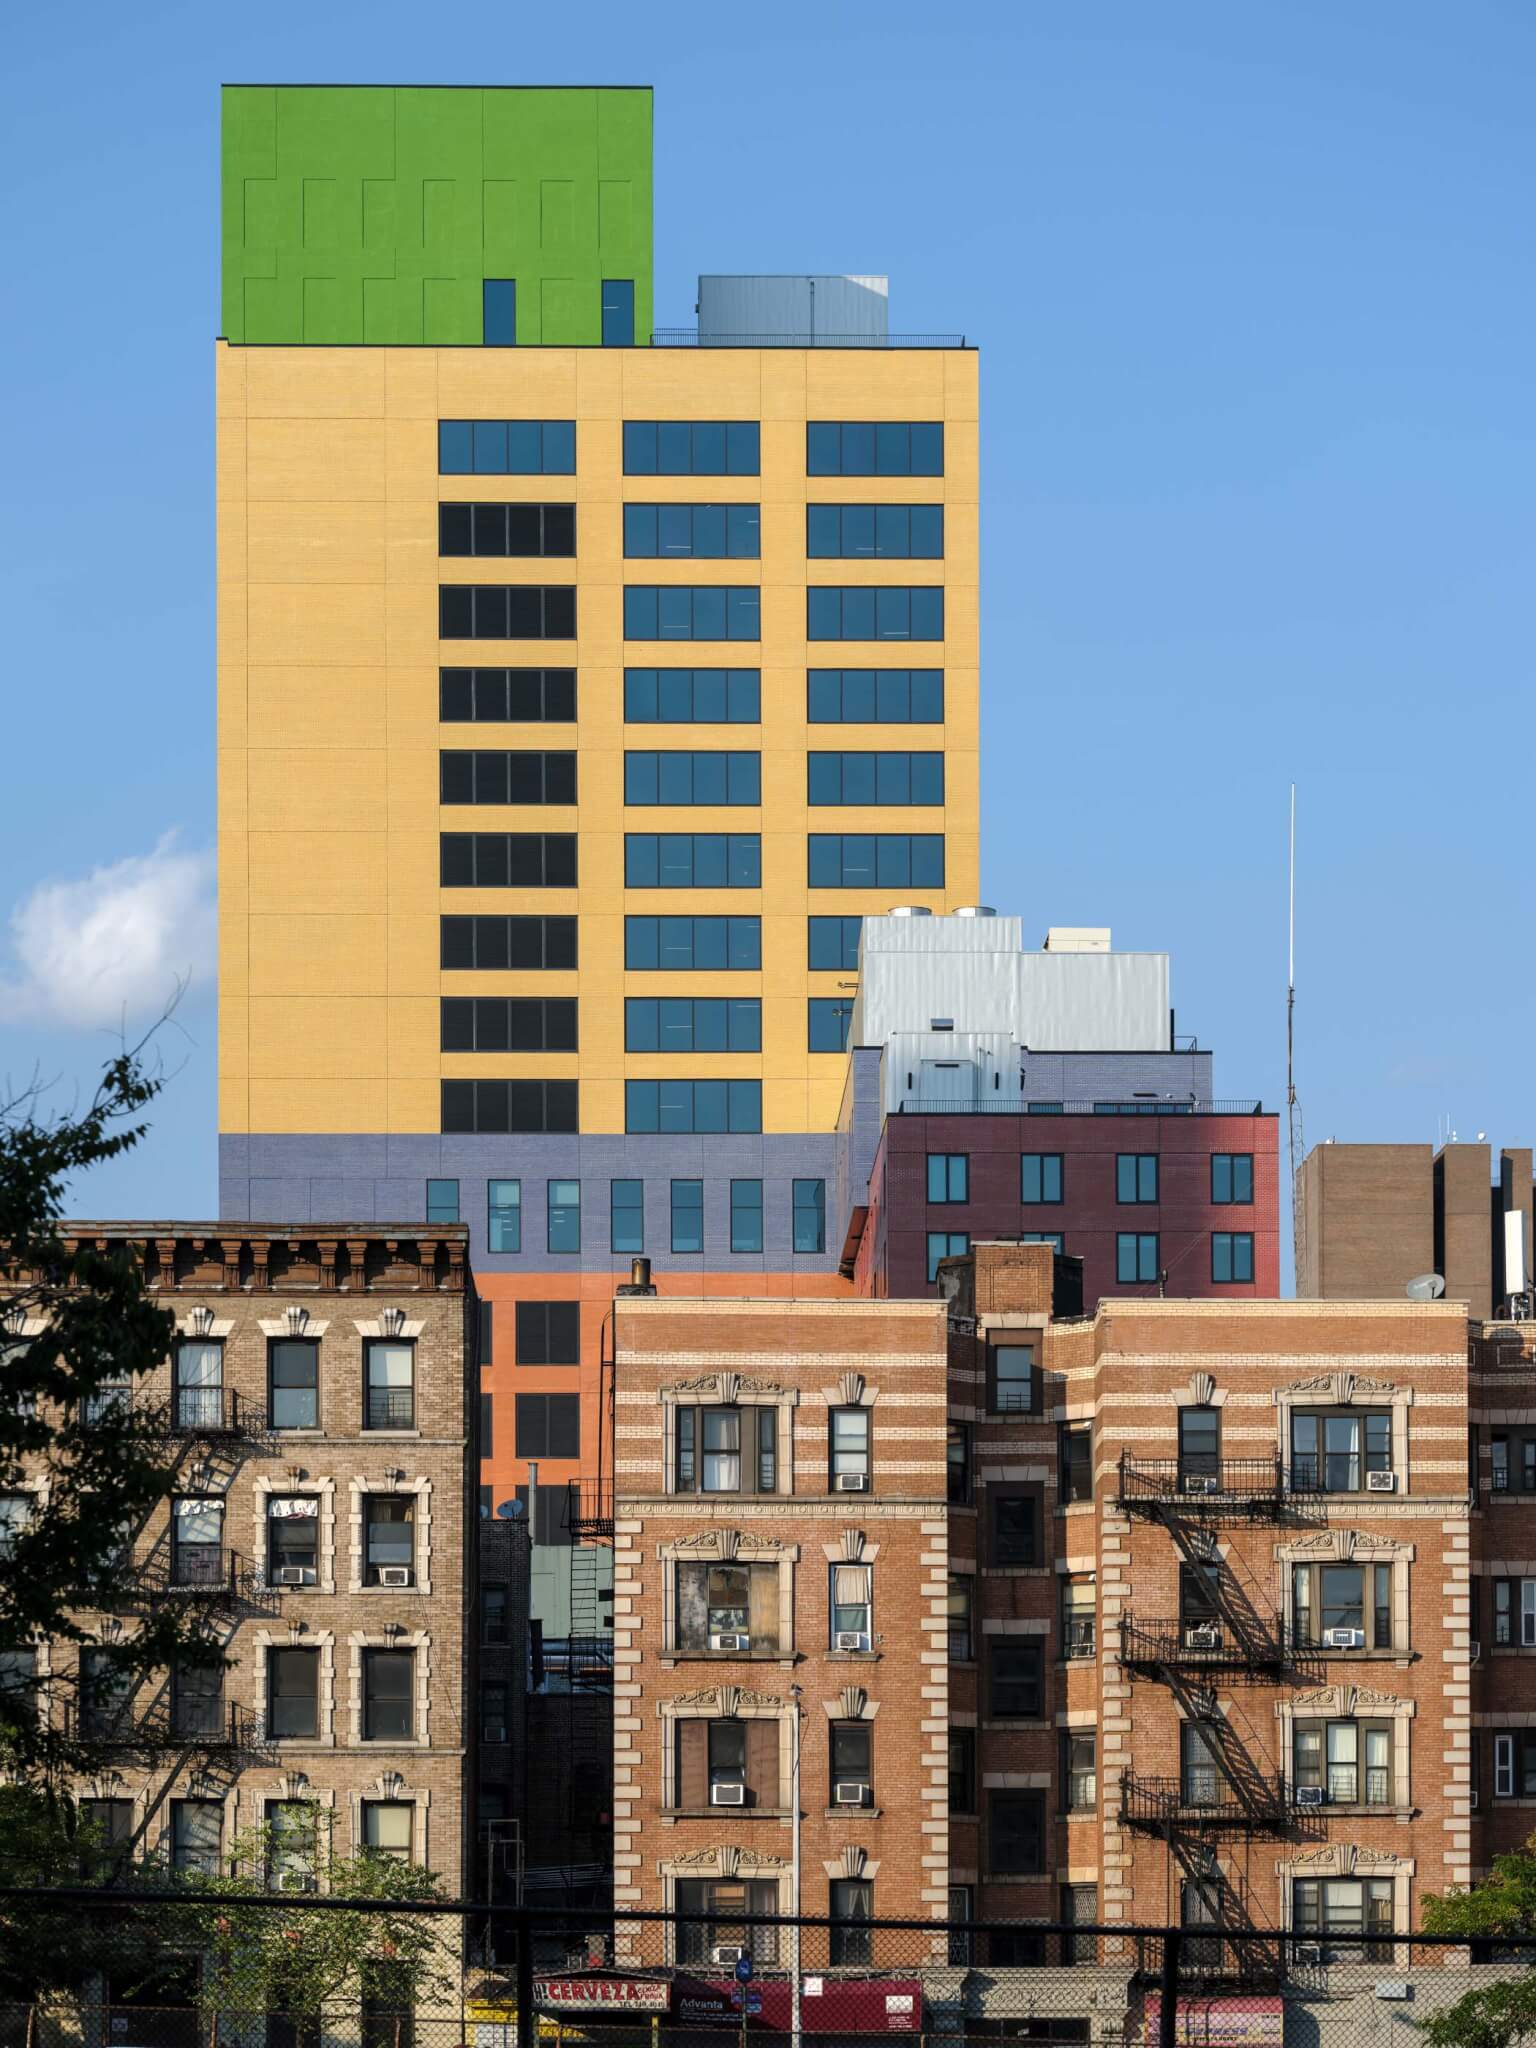 view of pre-war buildings with colorful building in back